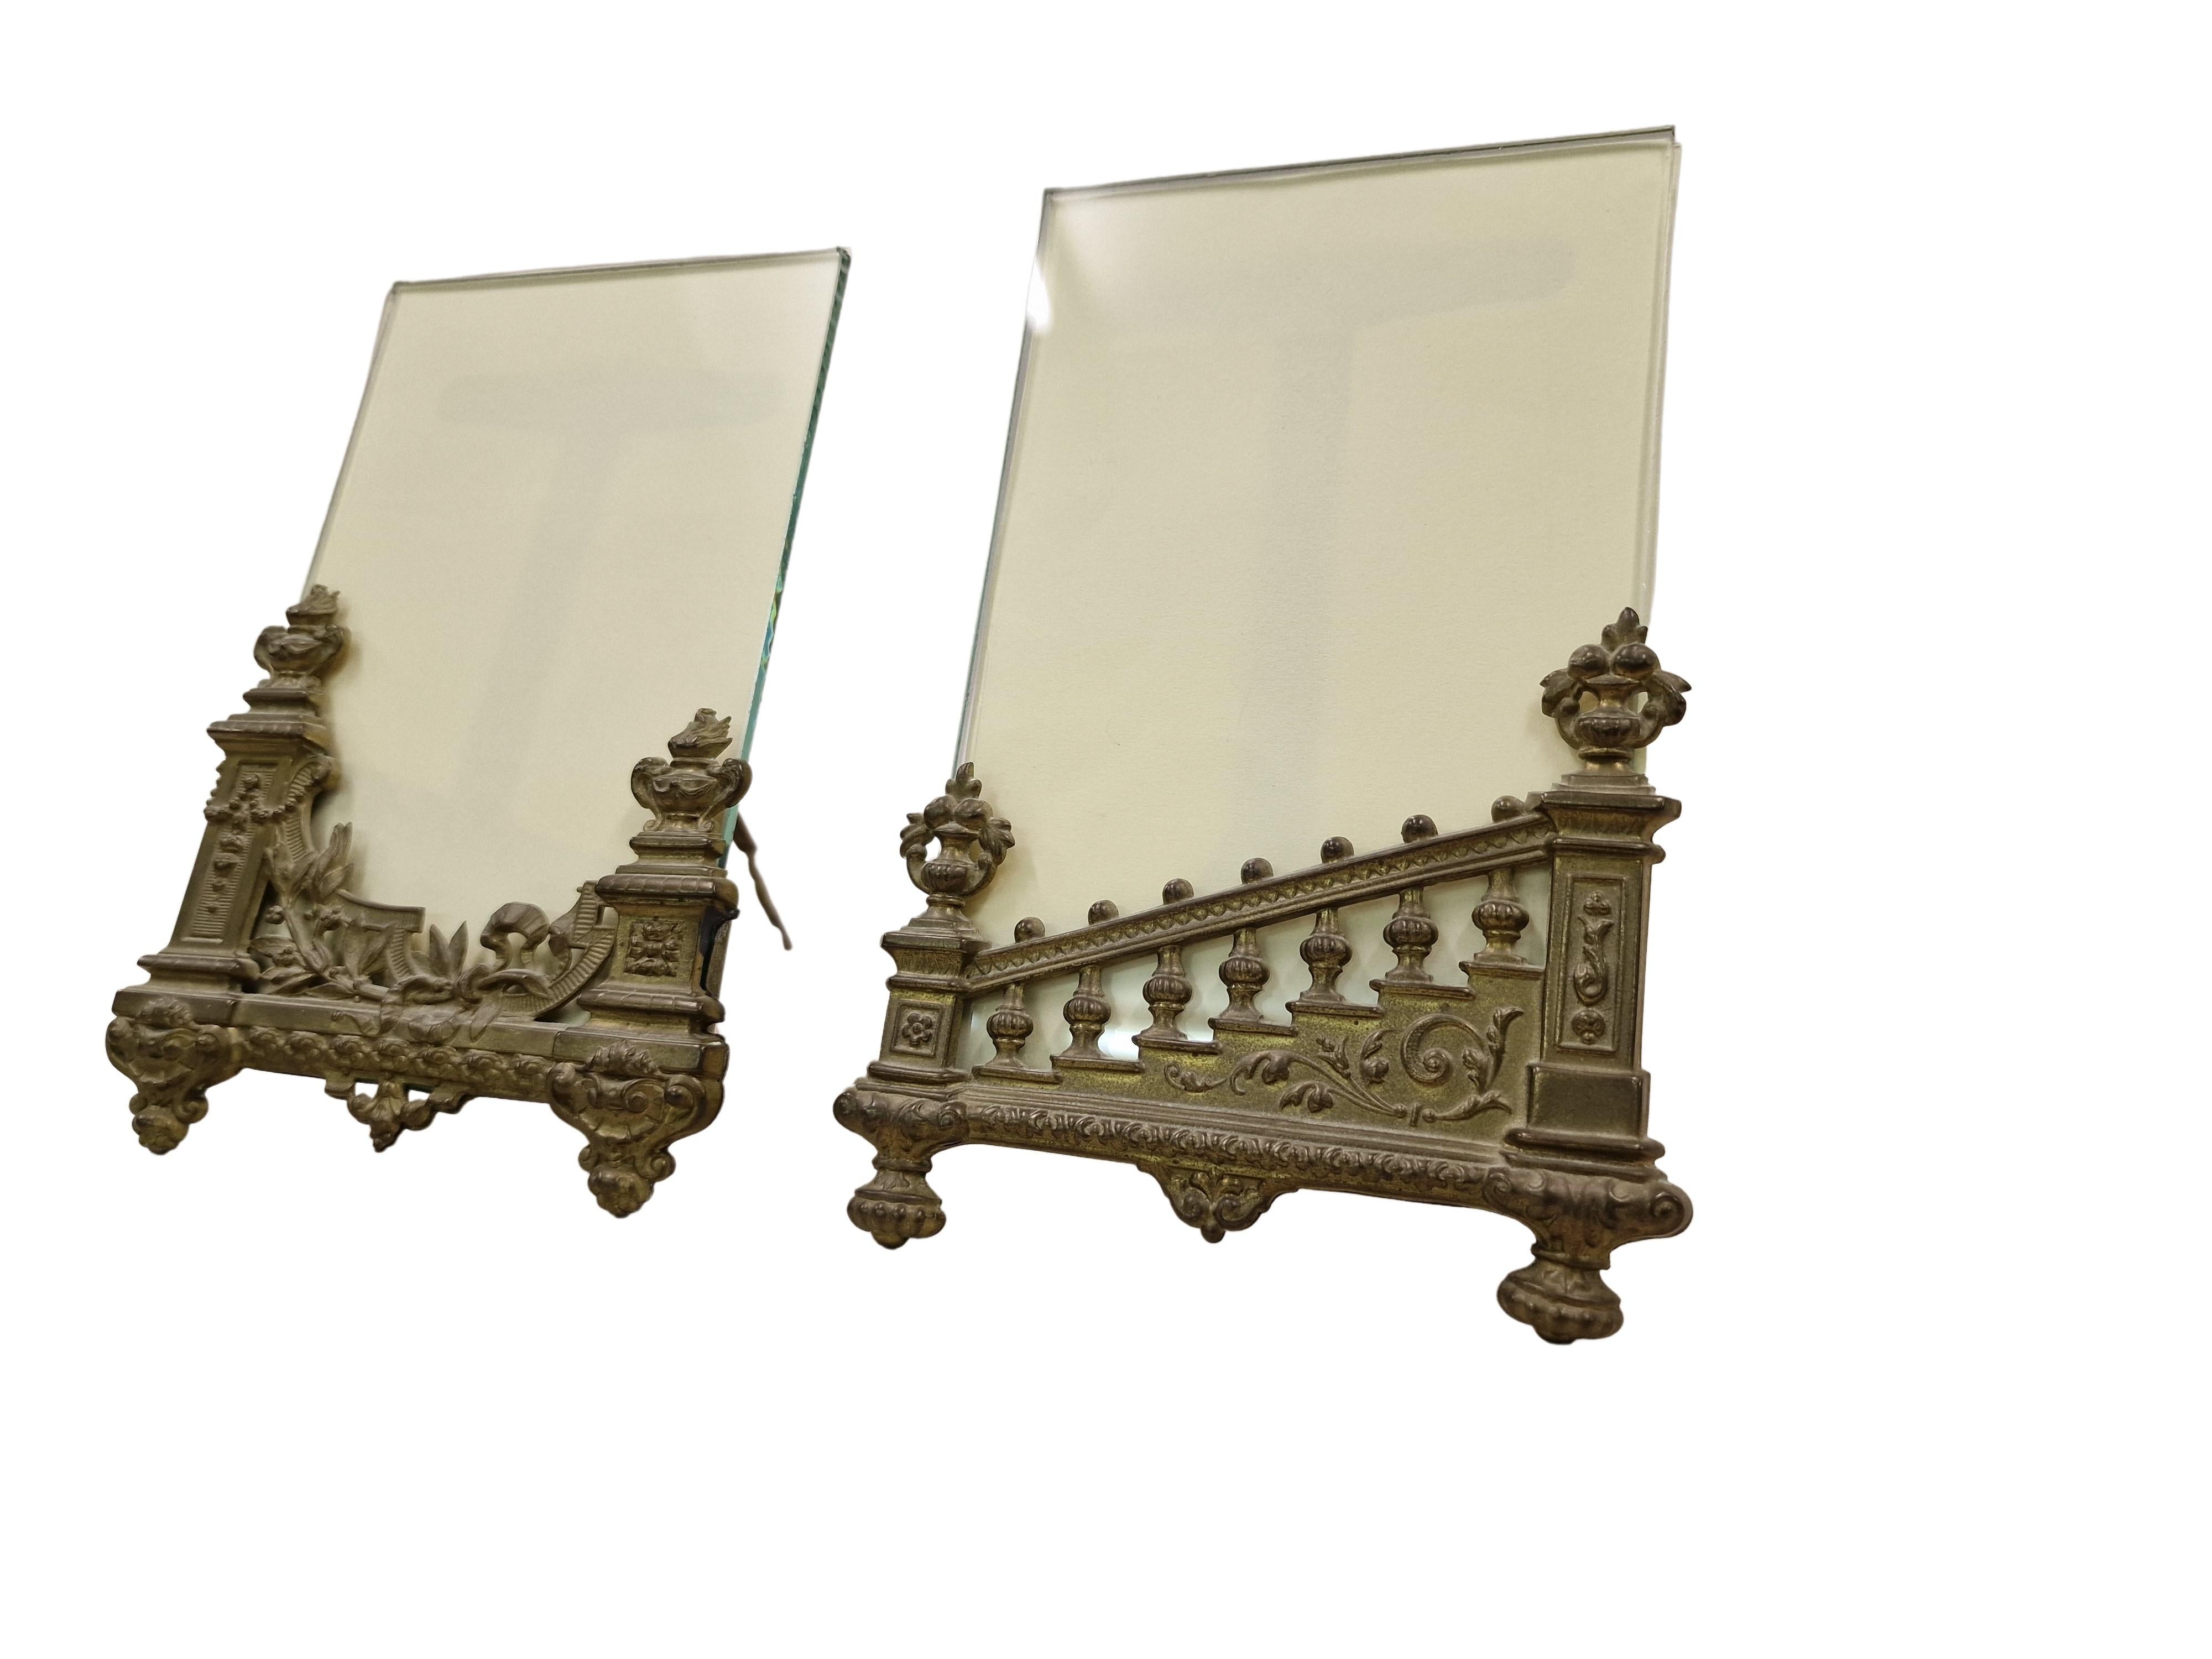 Wonderful pair of rare stand/table frames, made circa 1890. 
The construction is made of brass, into which a glass plate has been inserted, in between is place for the image you have chosen.

The construction of the frames is beautiful - there